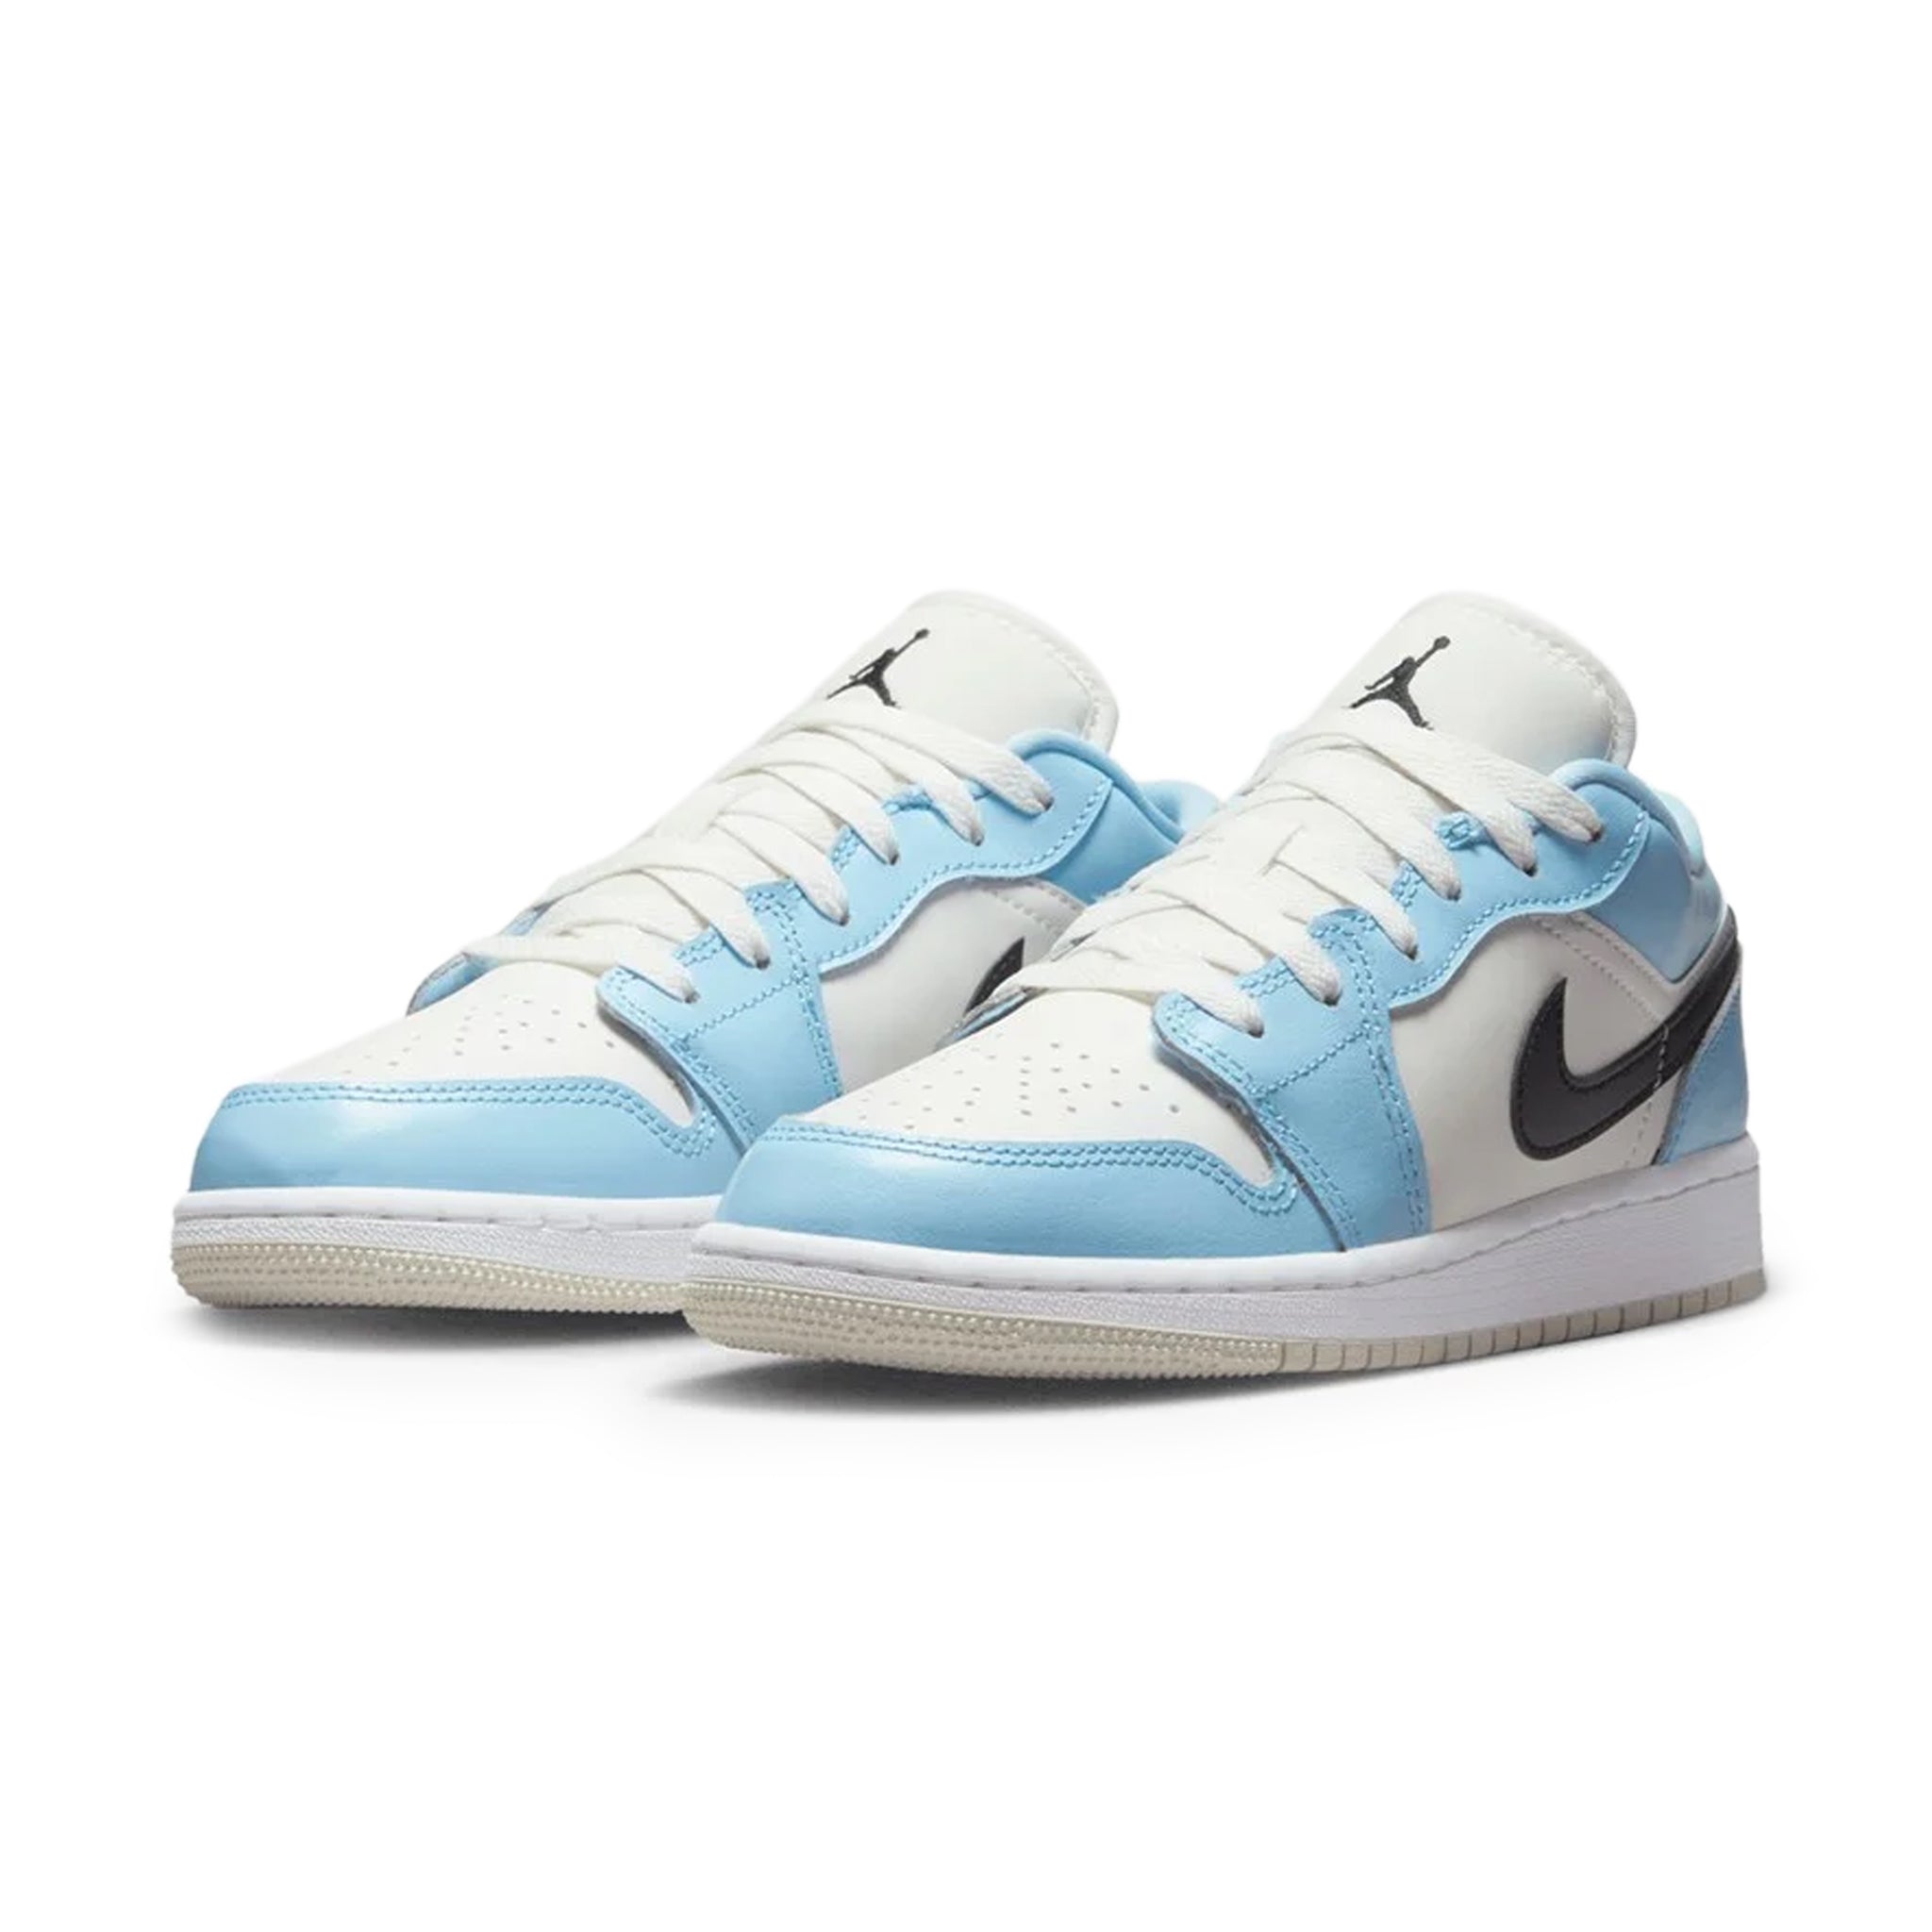 Front side view of Air Jordan 1 Low Ice Blue Black (GS) 554723-401